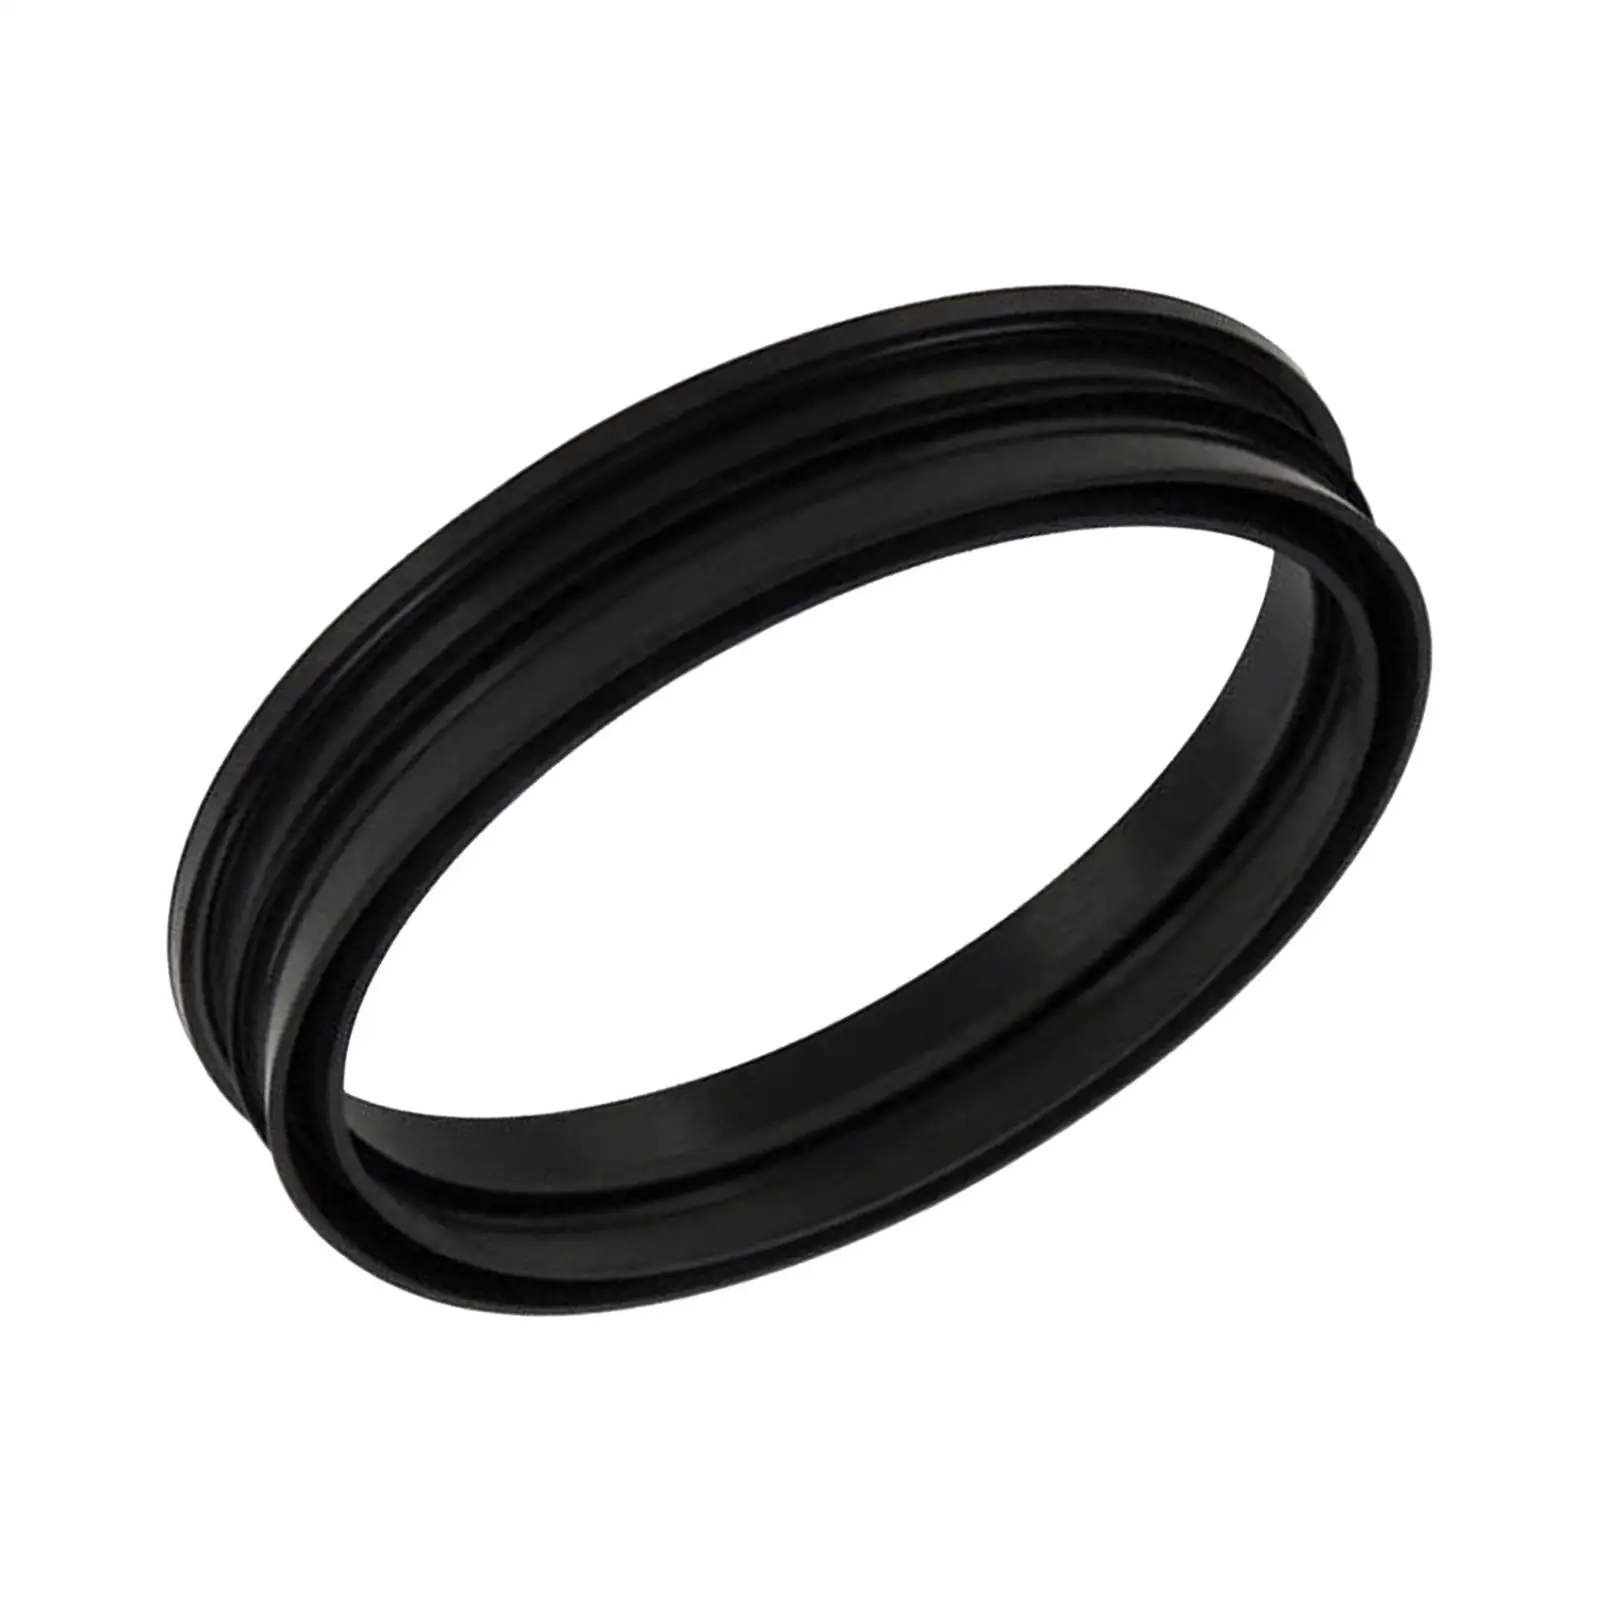 Fuel Tank Pump Seal O Ring 17342-79900 Easy to Install for Nissan Black